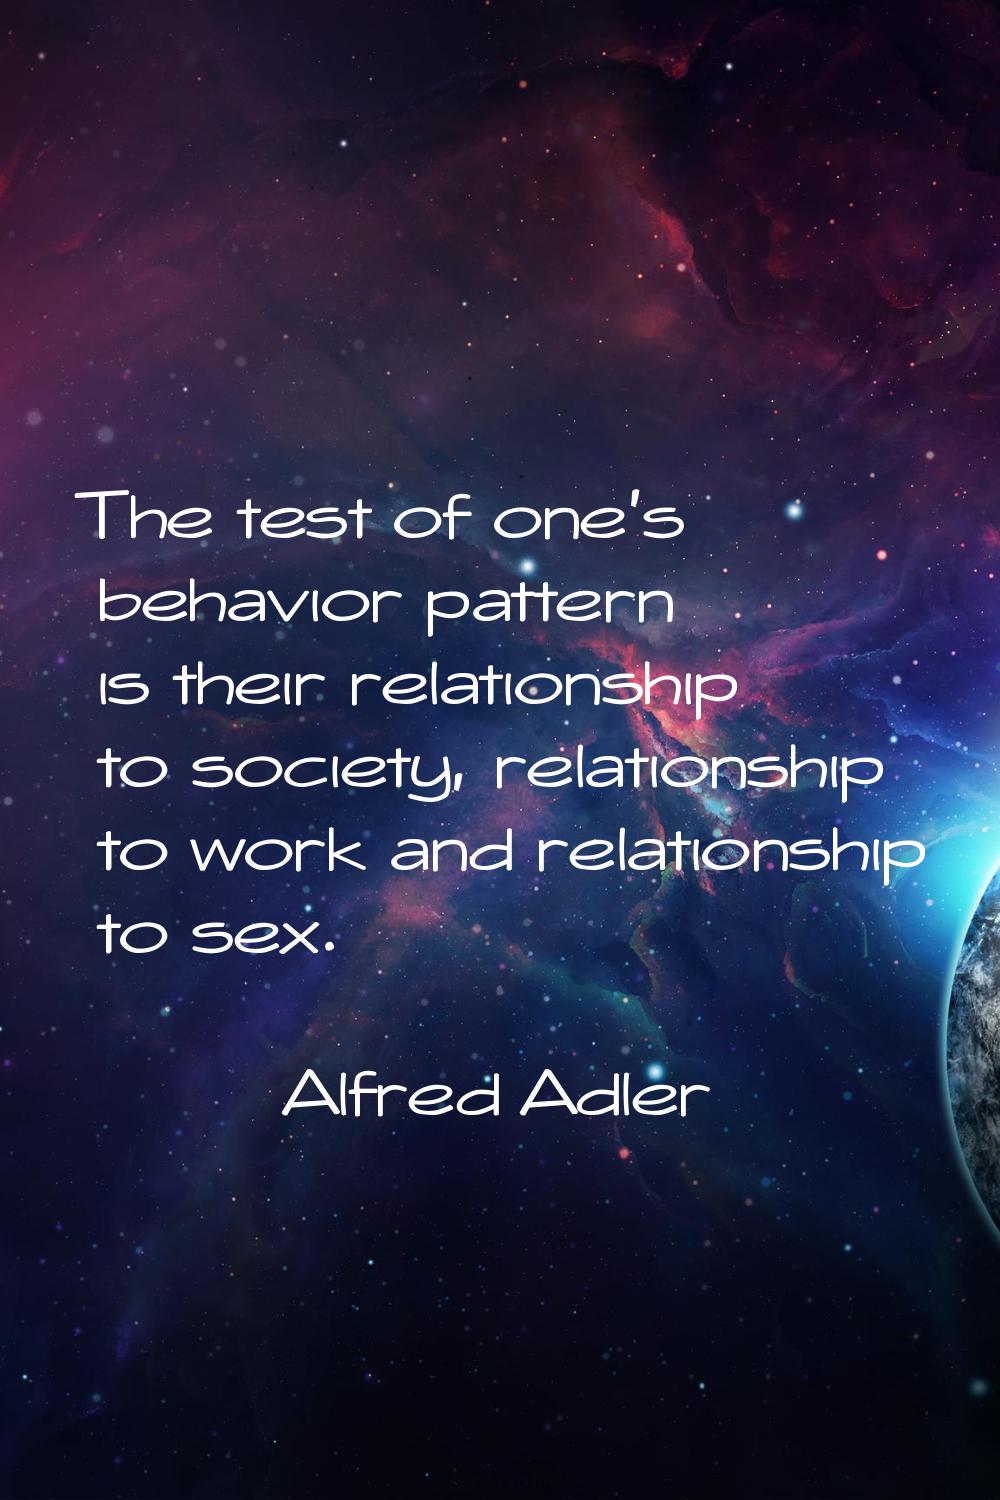 The test of one's behavior pattern is their relationship to society, relationship to work and relat